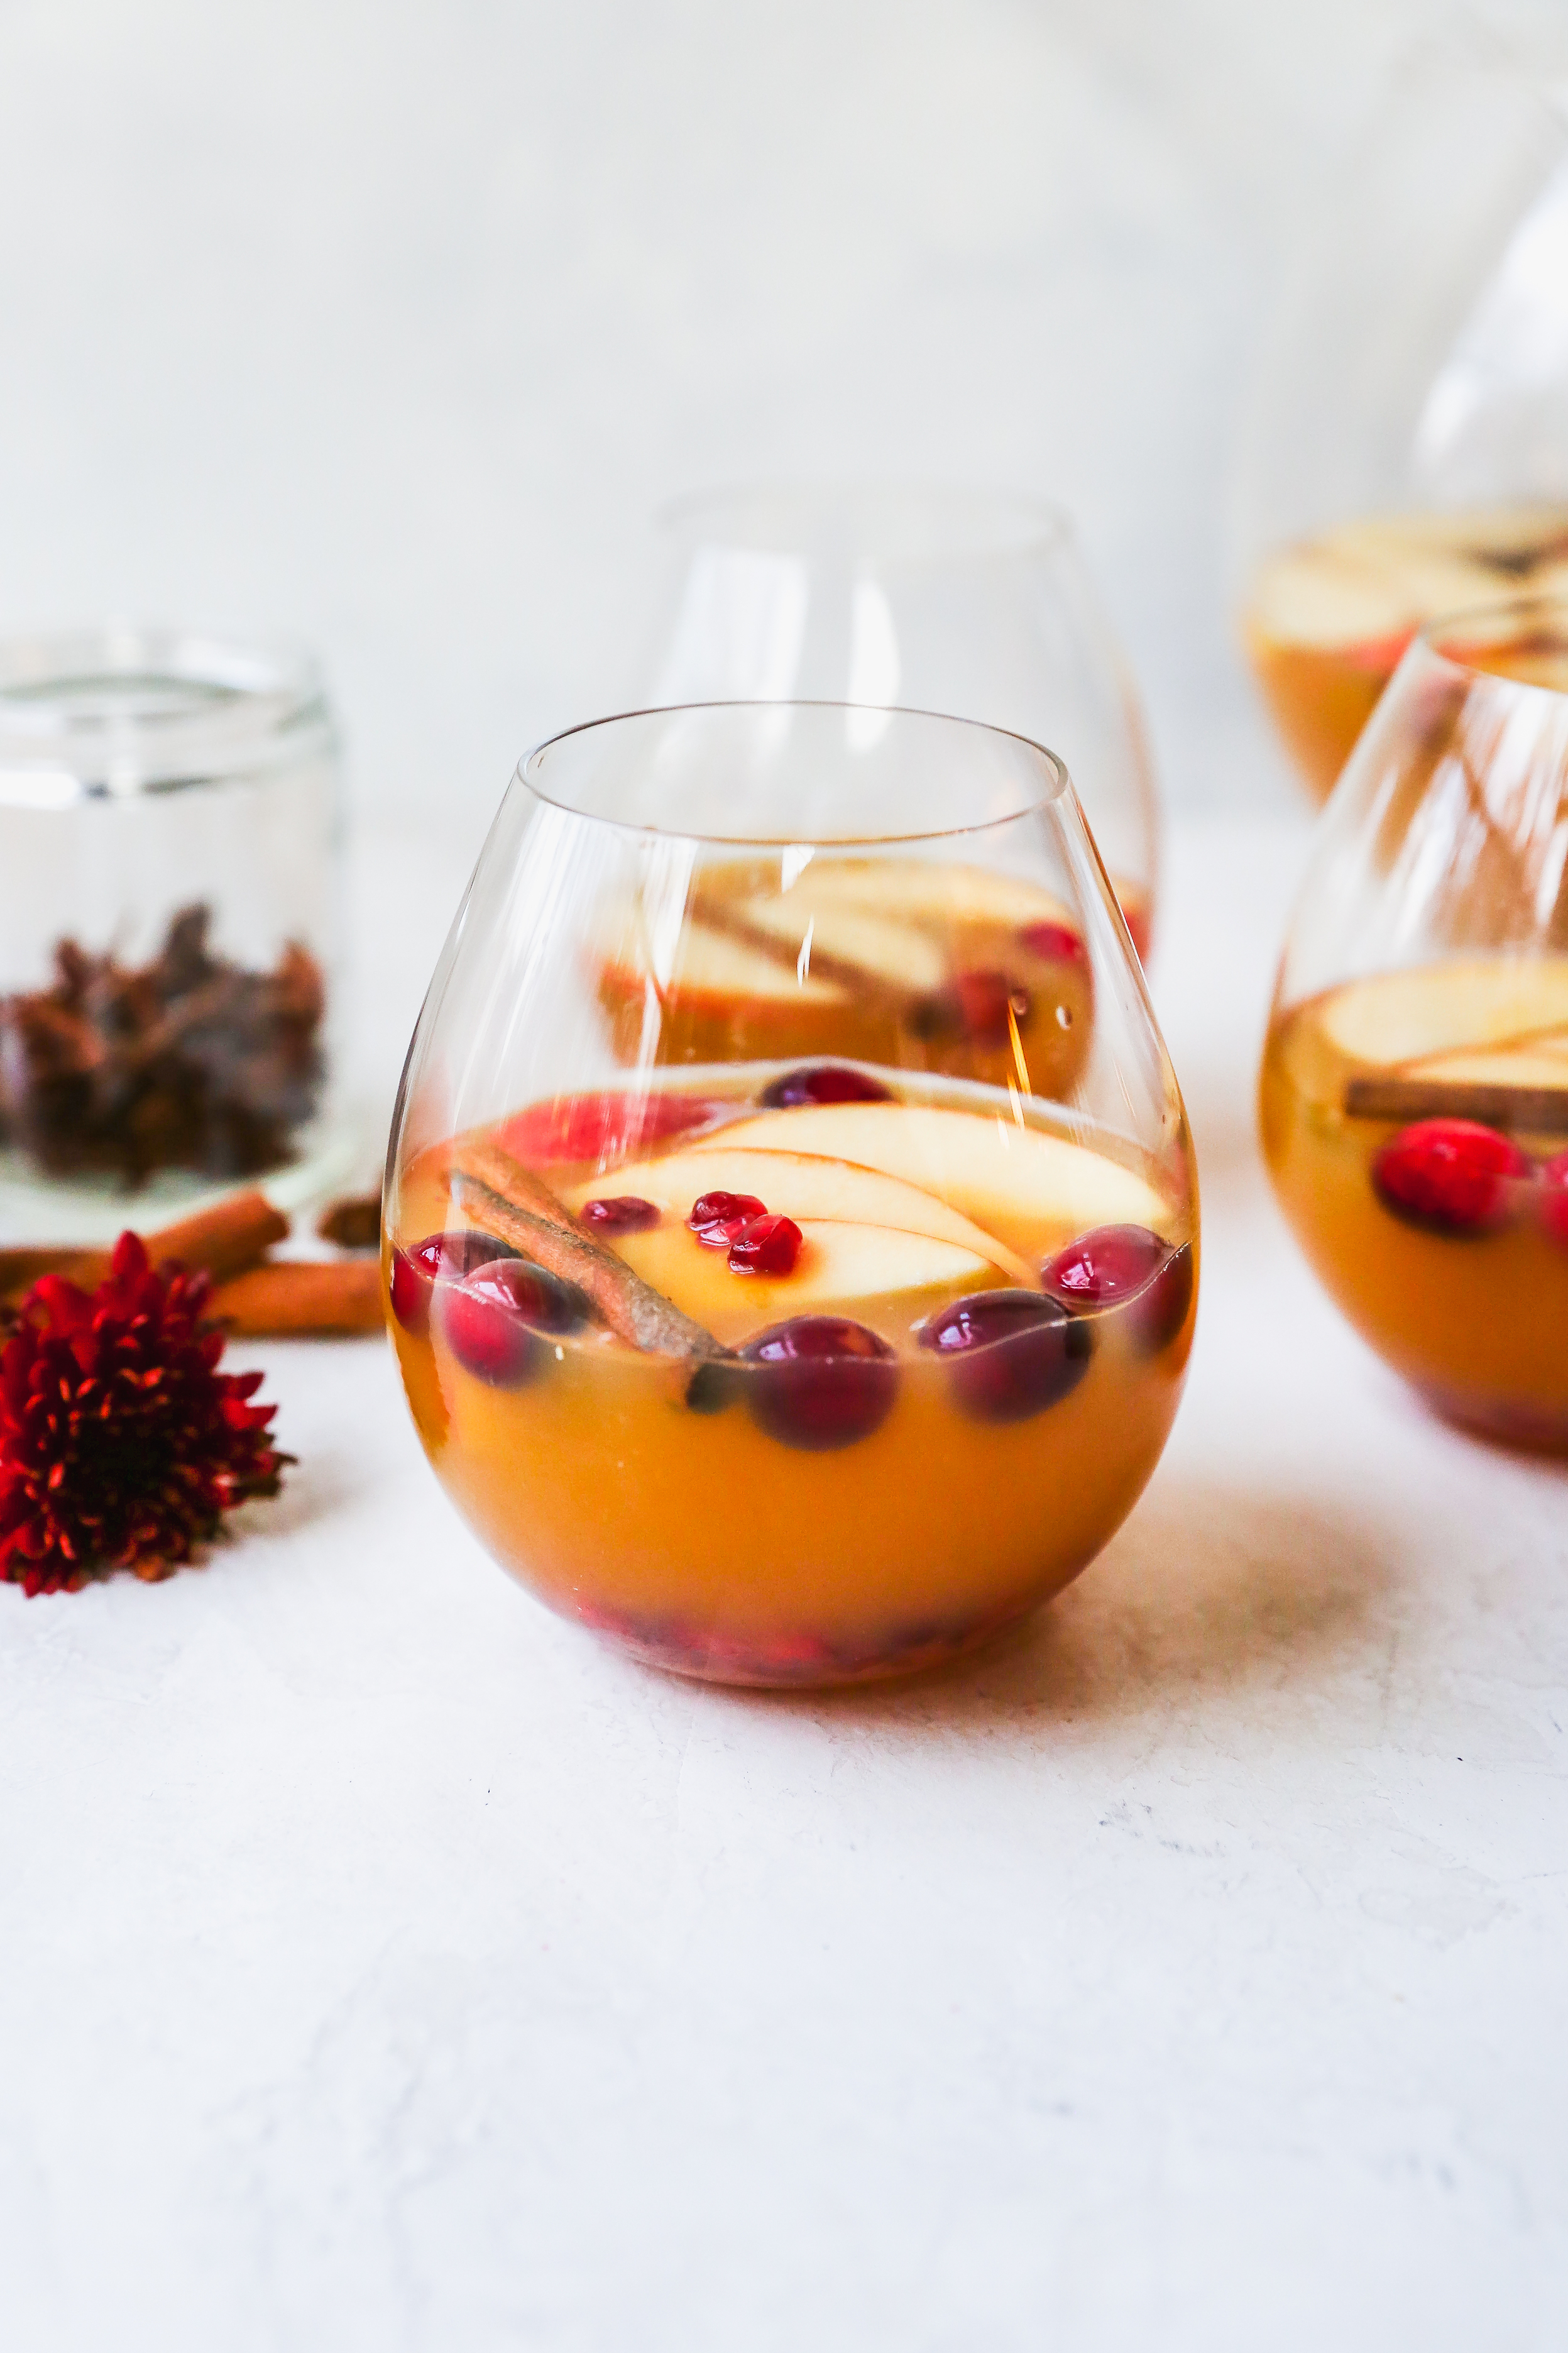 12 Fall Mocktails - Cozy Non-Alcoholic Drinks to Sip